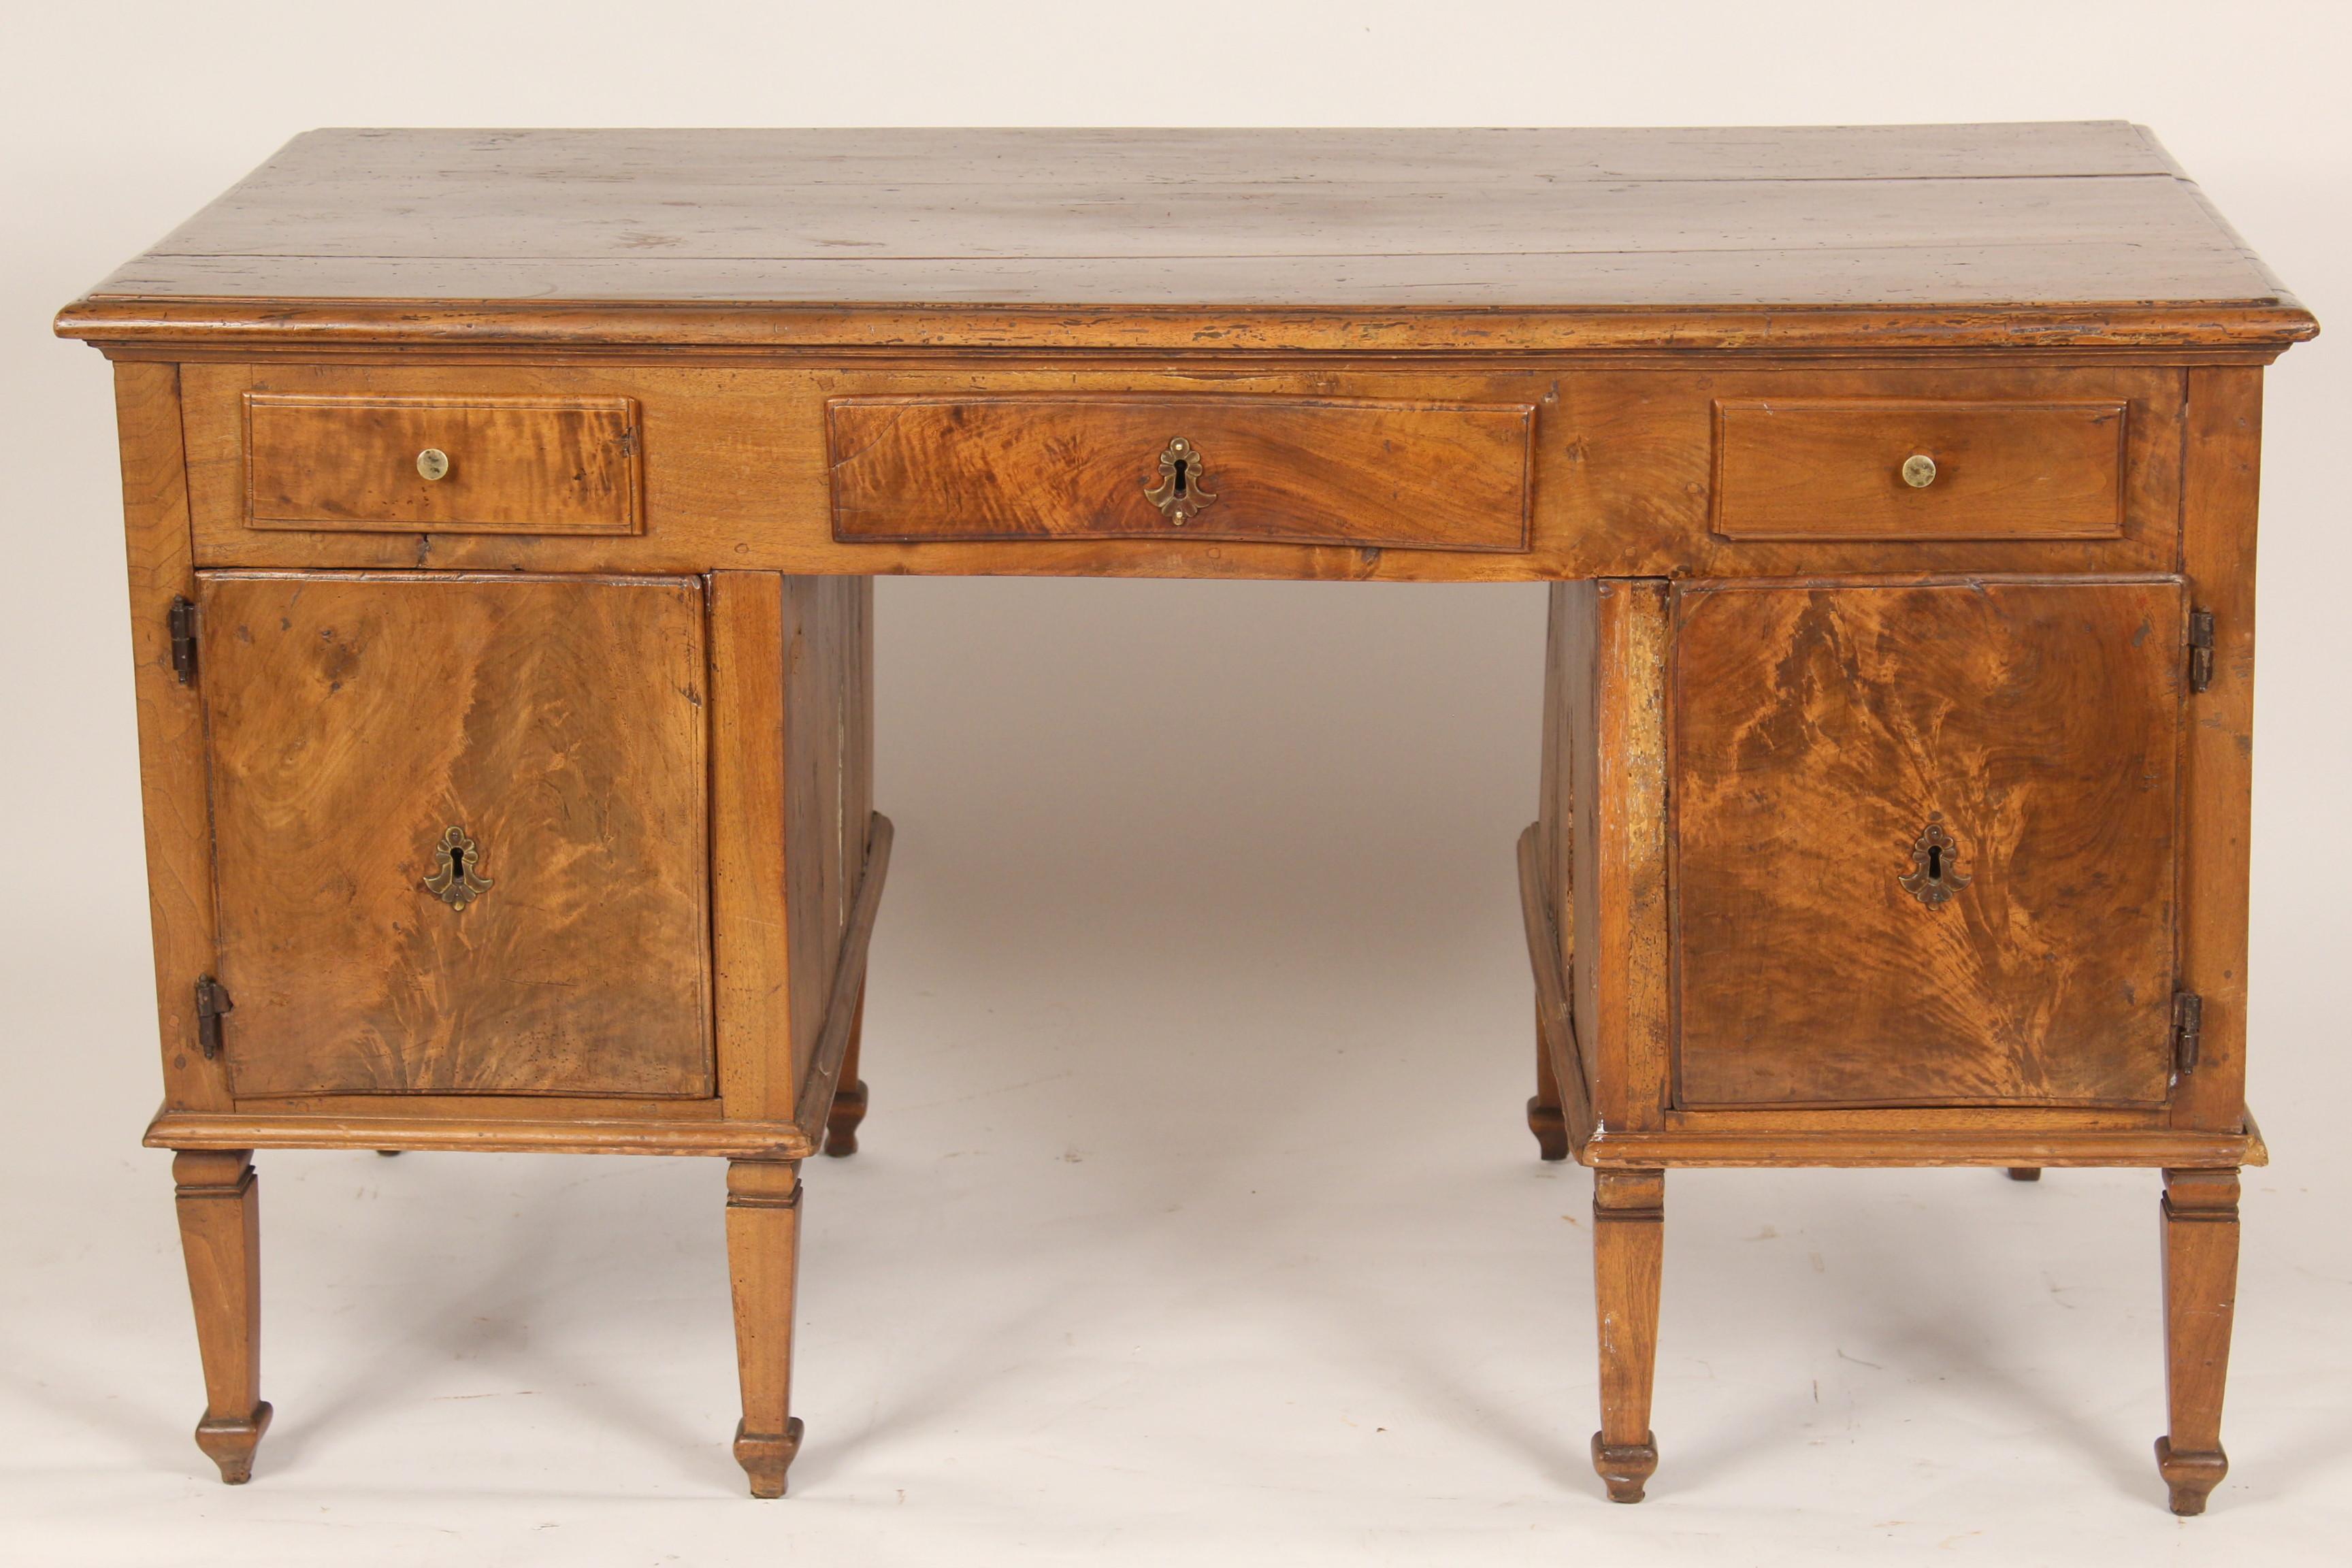 Antique Louis XVI style walnut double pedestal desk, 19th century. Back side of desk has false drawer fronts and doors so desk can be floated in the center of a room. Knee clearance, height 23.25